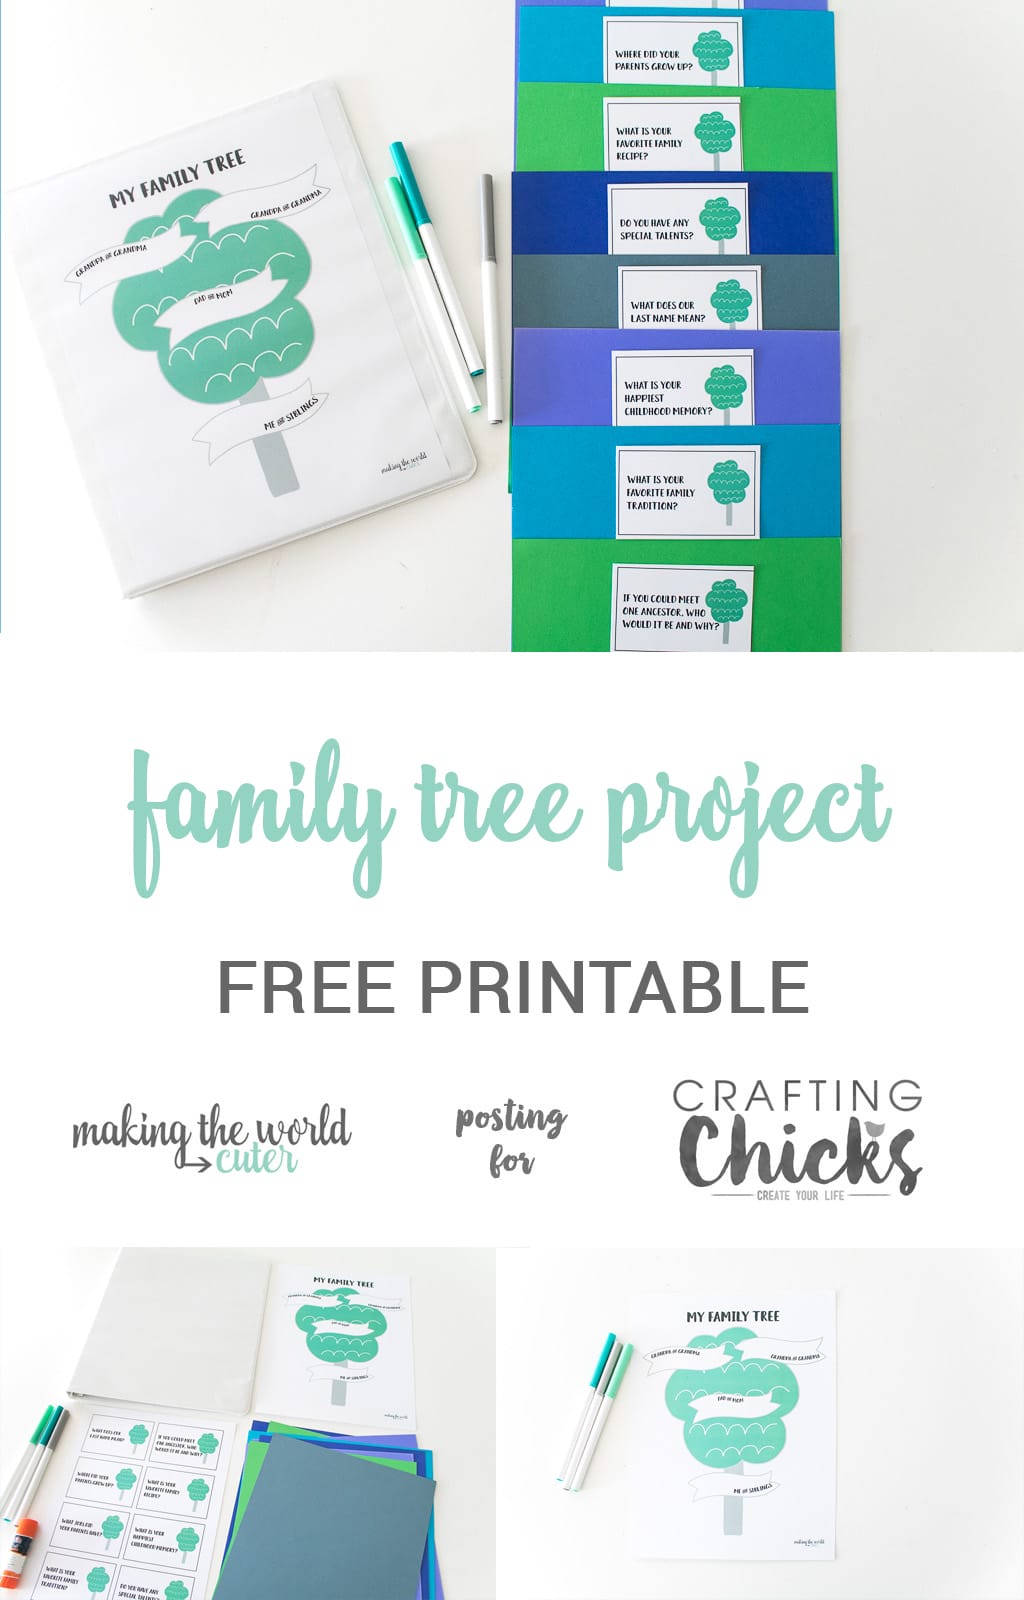 Family Tree Project for Kids with Free Printable Tree and Questions | Print out the family tree and the question cards to make a cute book that will be filled with family memories and history and get the kids excited about family history. #familytree #kids #craft #activity #familyhistory